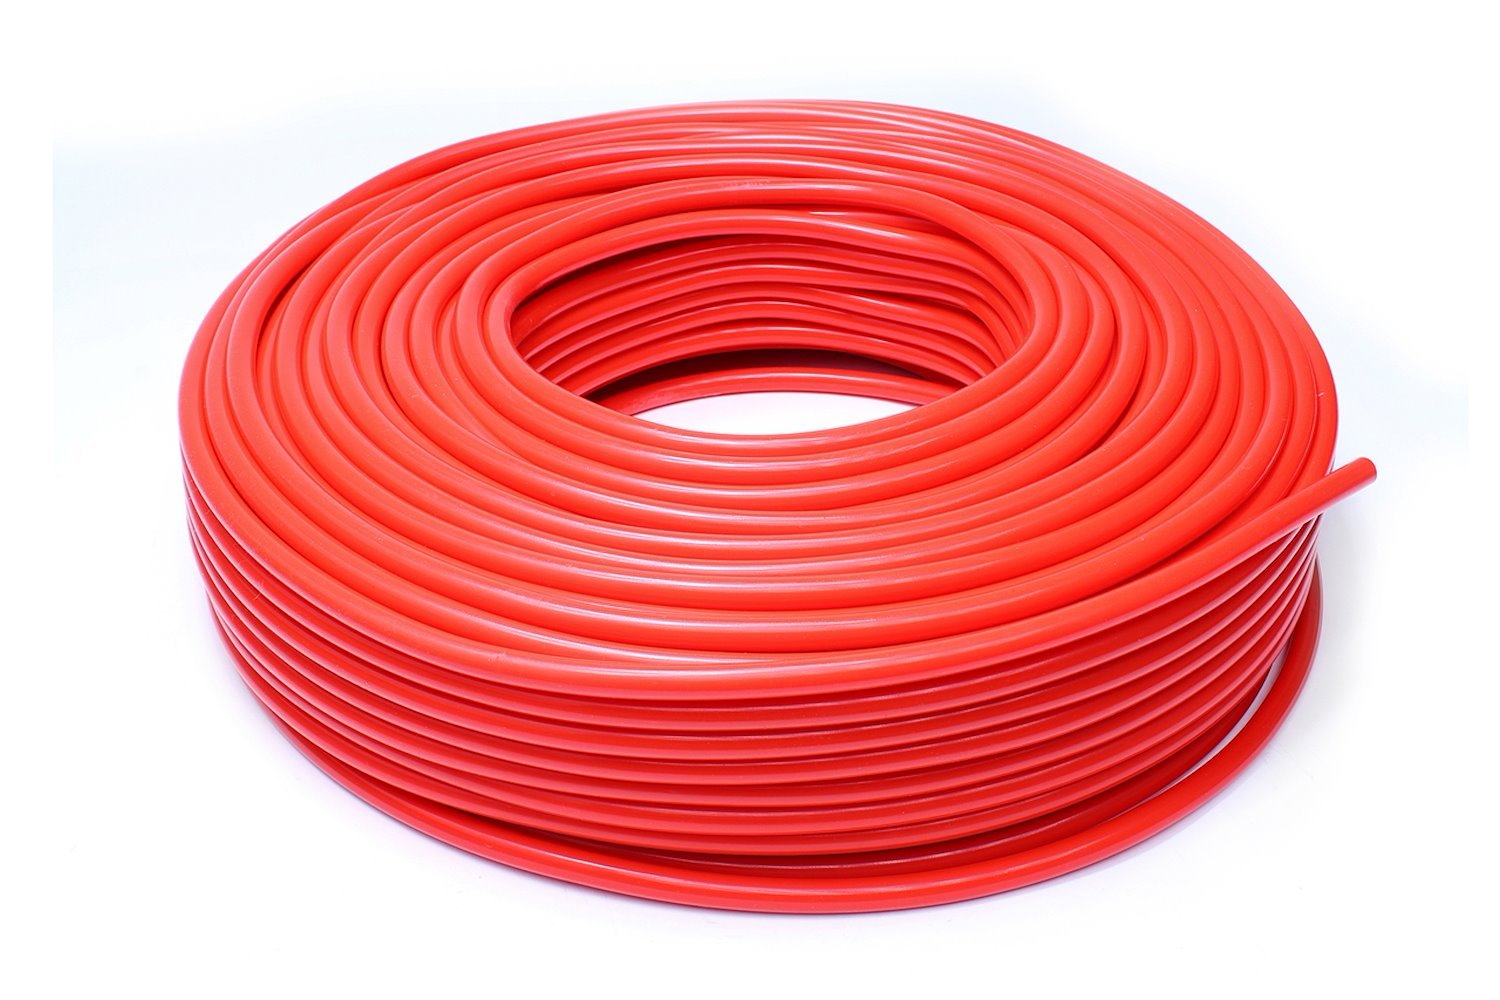 HTSVH2-REDx100 High-Temperature Silicone Vacuum Hose Tubing, 5/64 in. ID, 100 ft. Roll, Red